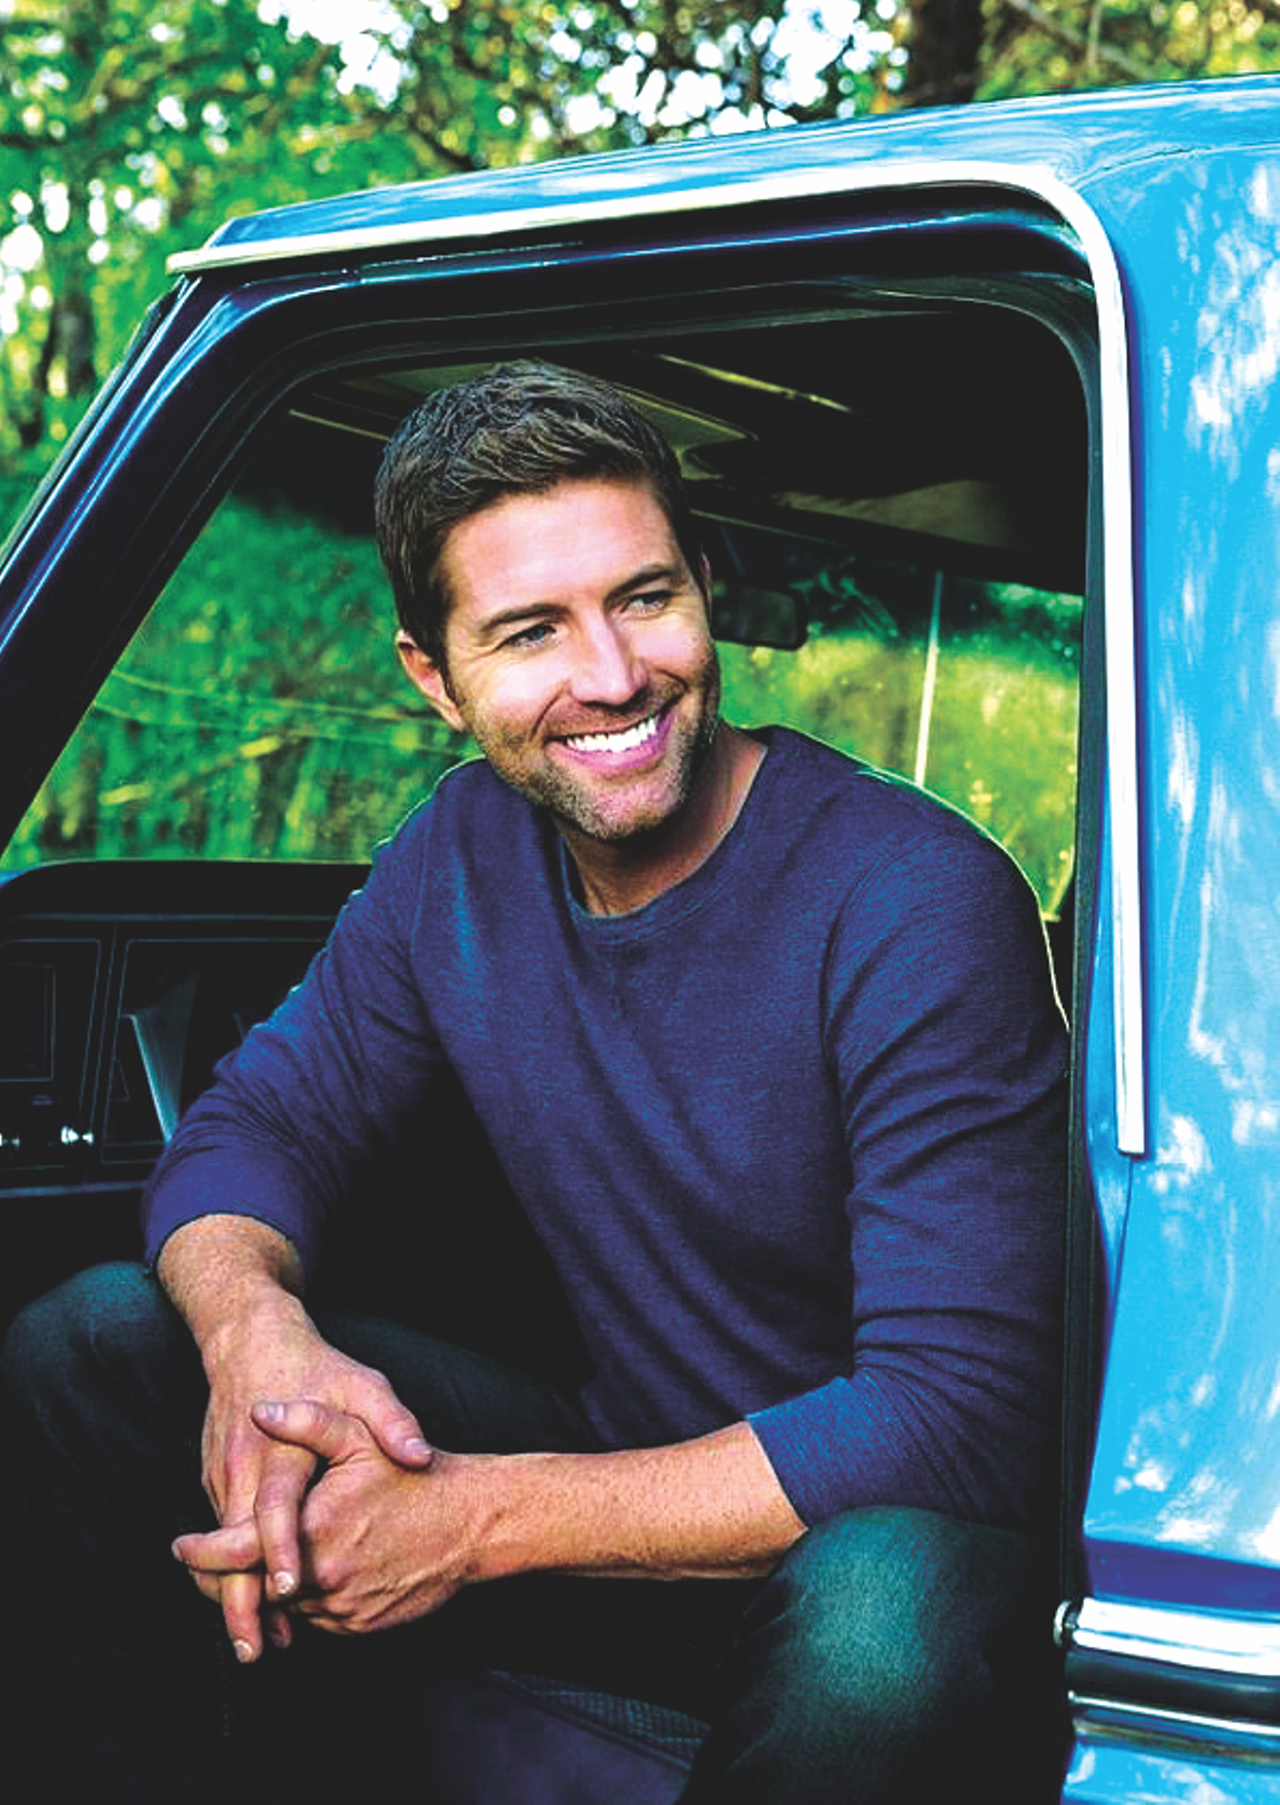 Fri 12/8
Josh Turner
With the lowest of basses and a smile that could melt the coldest of hearts, Josh Turner takes '90s sounding contemporary country to a newer and more modern edge for am endearing blend of straight-forward country and pop-rock. The country heartthrob rocked the Rodeo earlier this year, so if you missed him here’s your chance to get up close and personal with one of the best acts the genre has to offer. $20-$40, 7pm, Cowboys Dancehall, 3030 NE 410 Loop, (210) 646-9378, cowboysdancehall.com. – CC